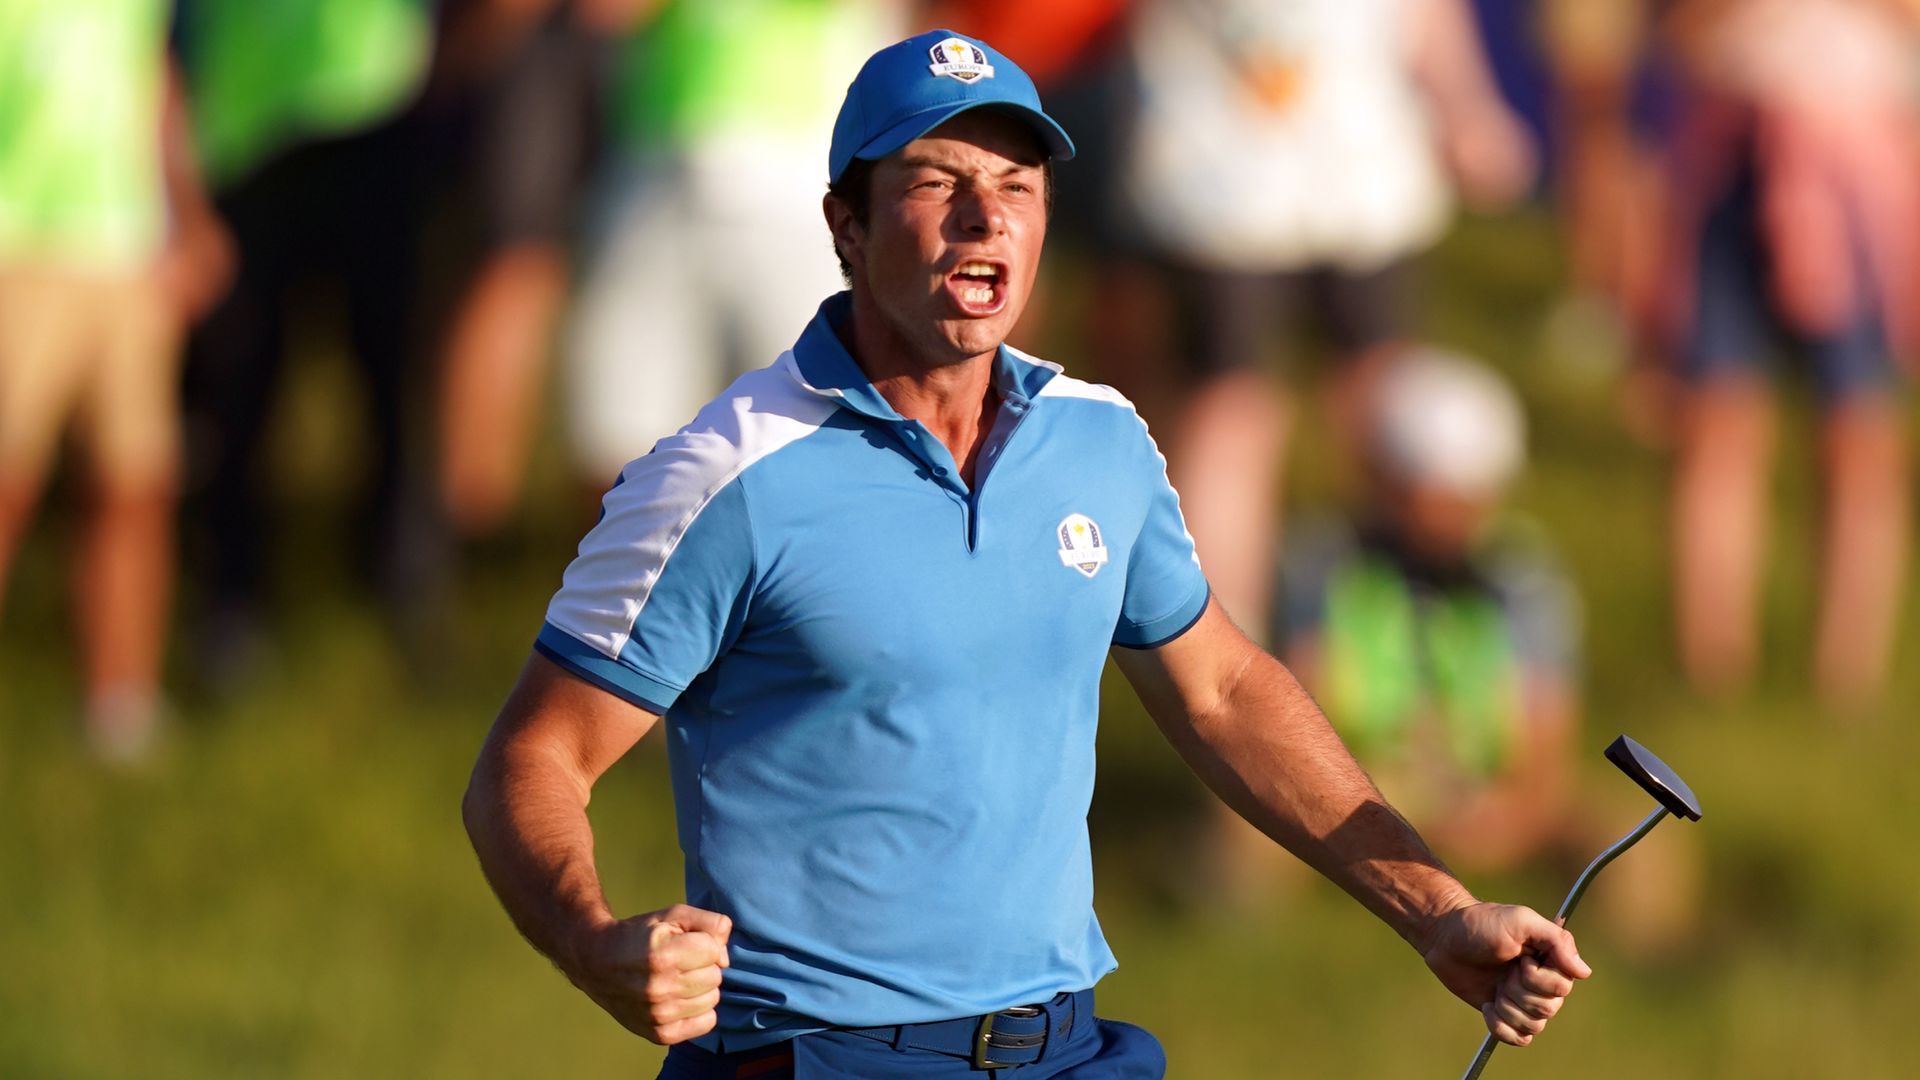 Europe extend Ryder Cup lead after late fourball heroics